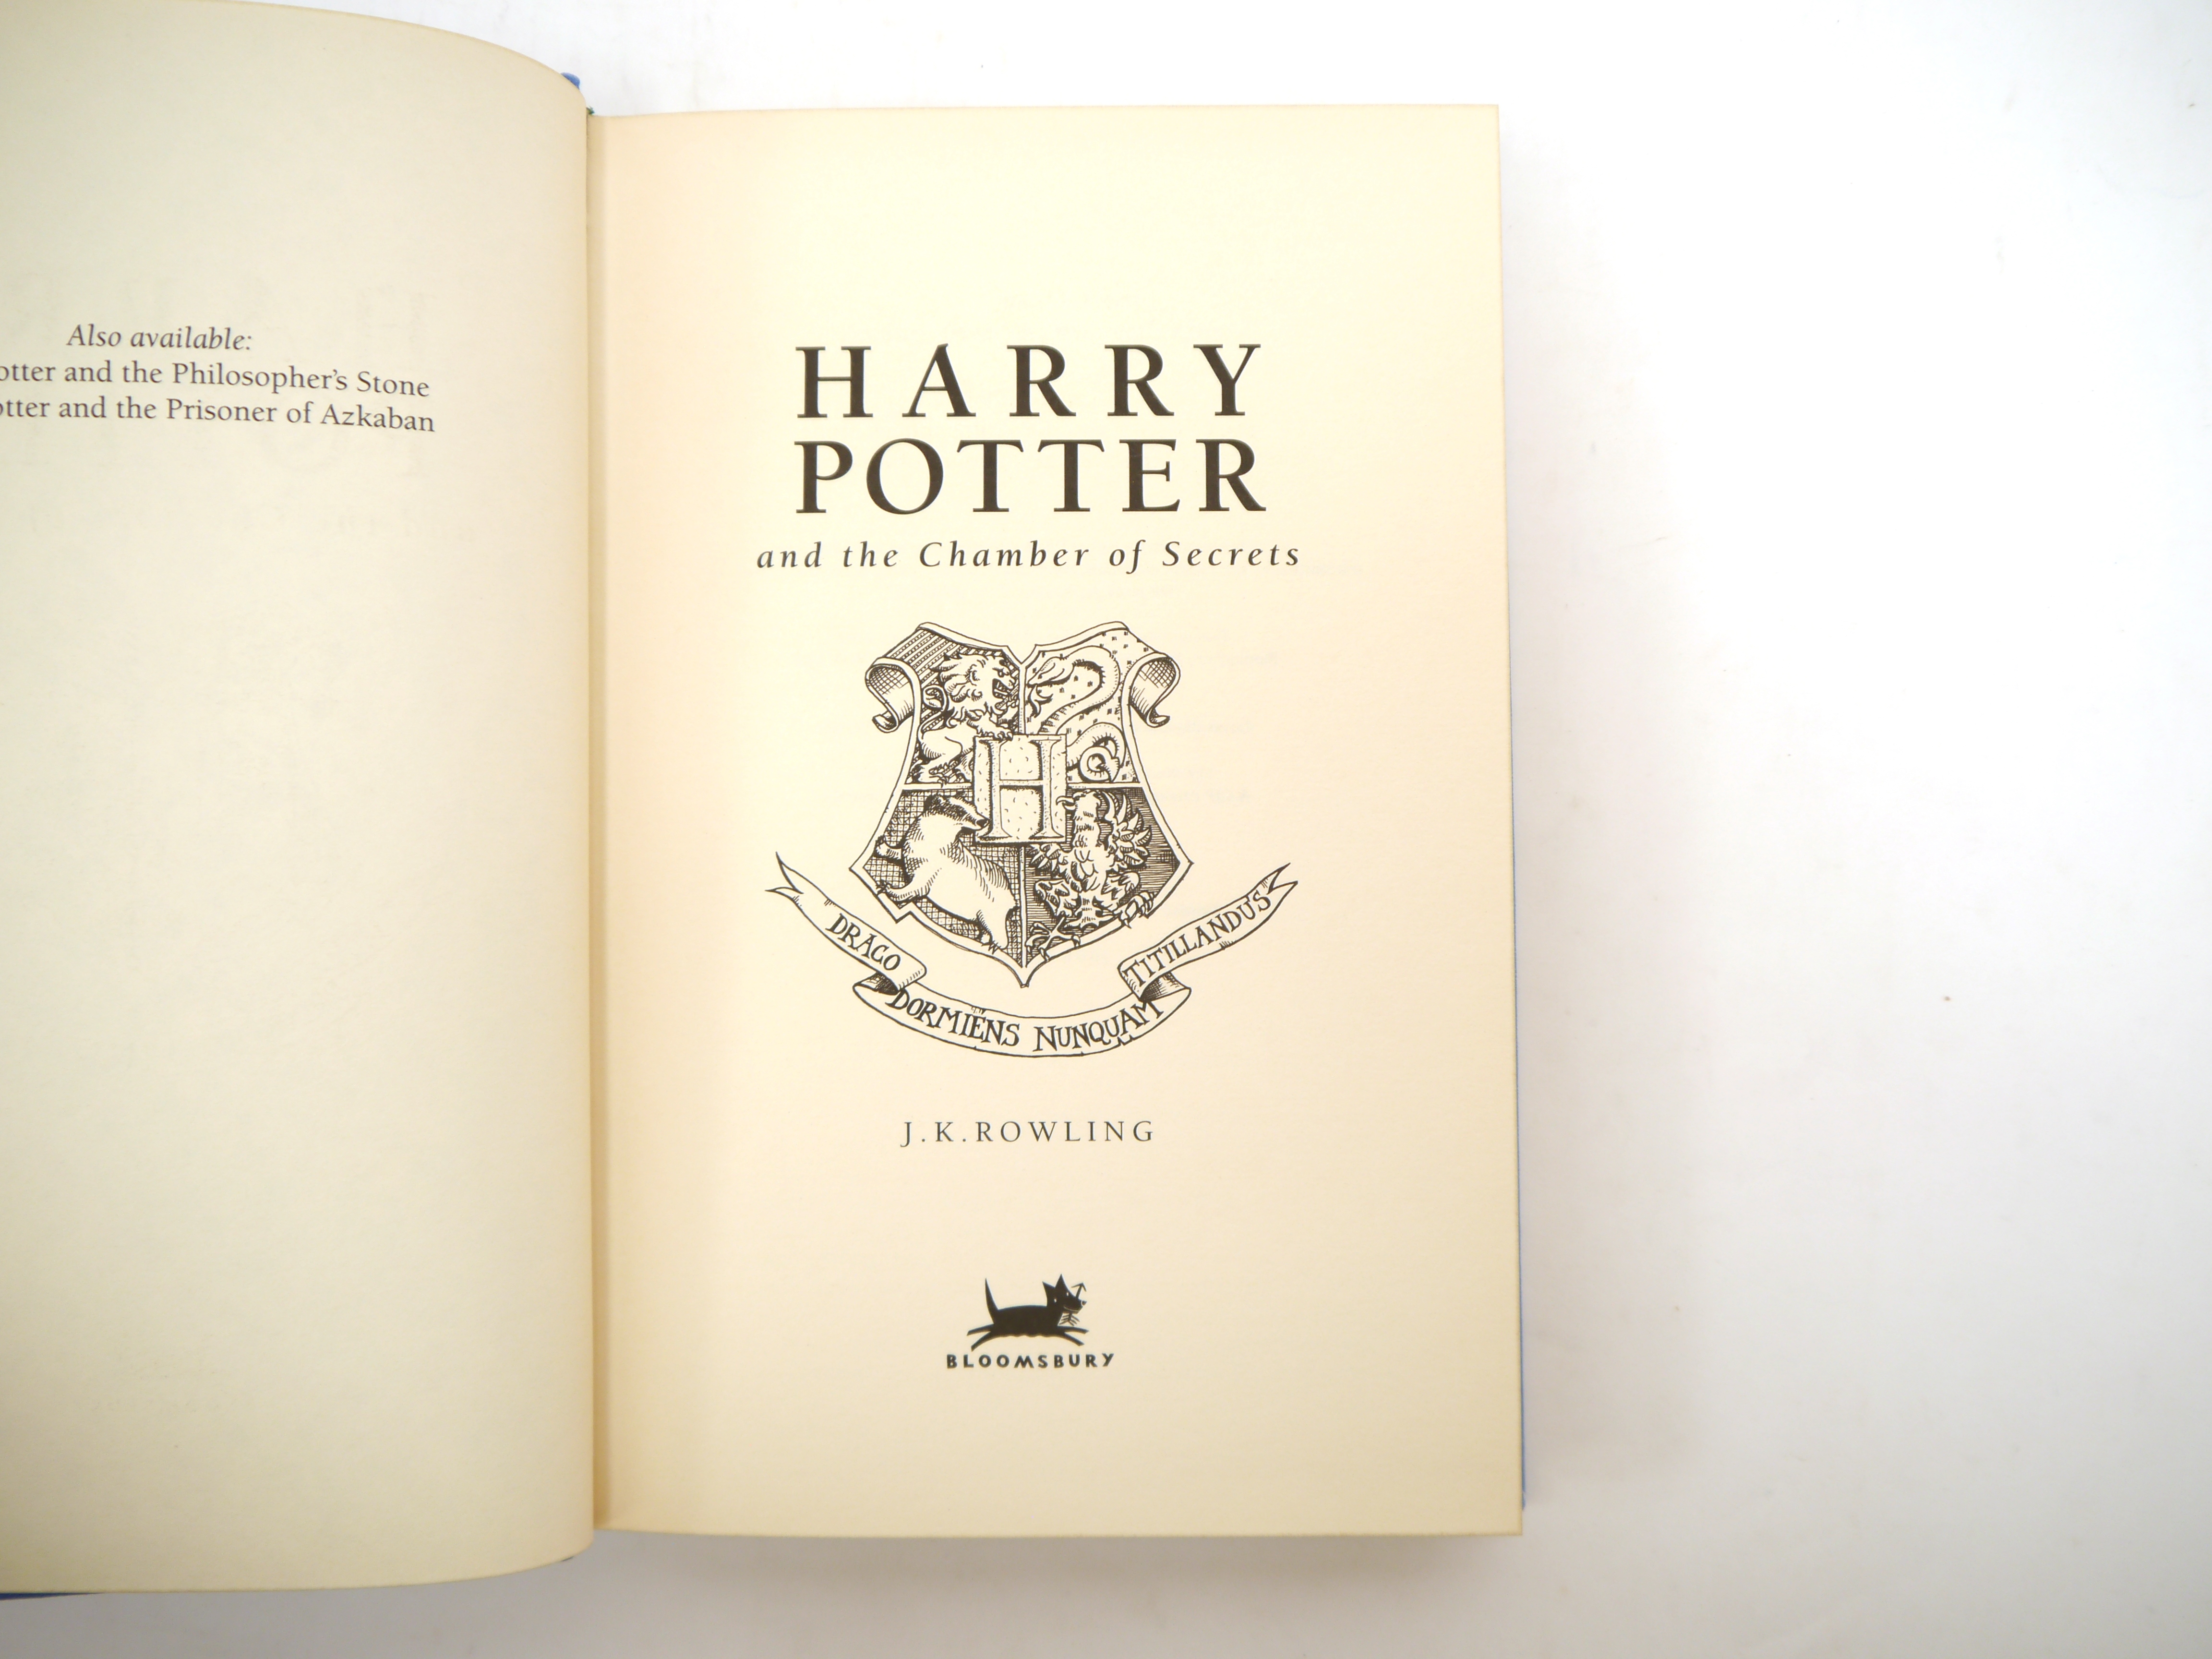 J.K. Rowling: 'Harry Potter and the Chamber of Secrets', London, Bloomsbury, 1999, 1st deluxe - Image 3 of 7